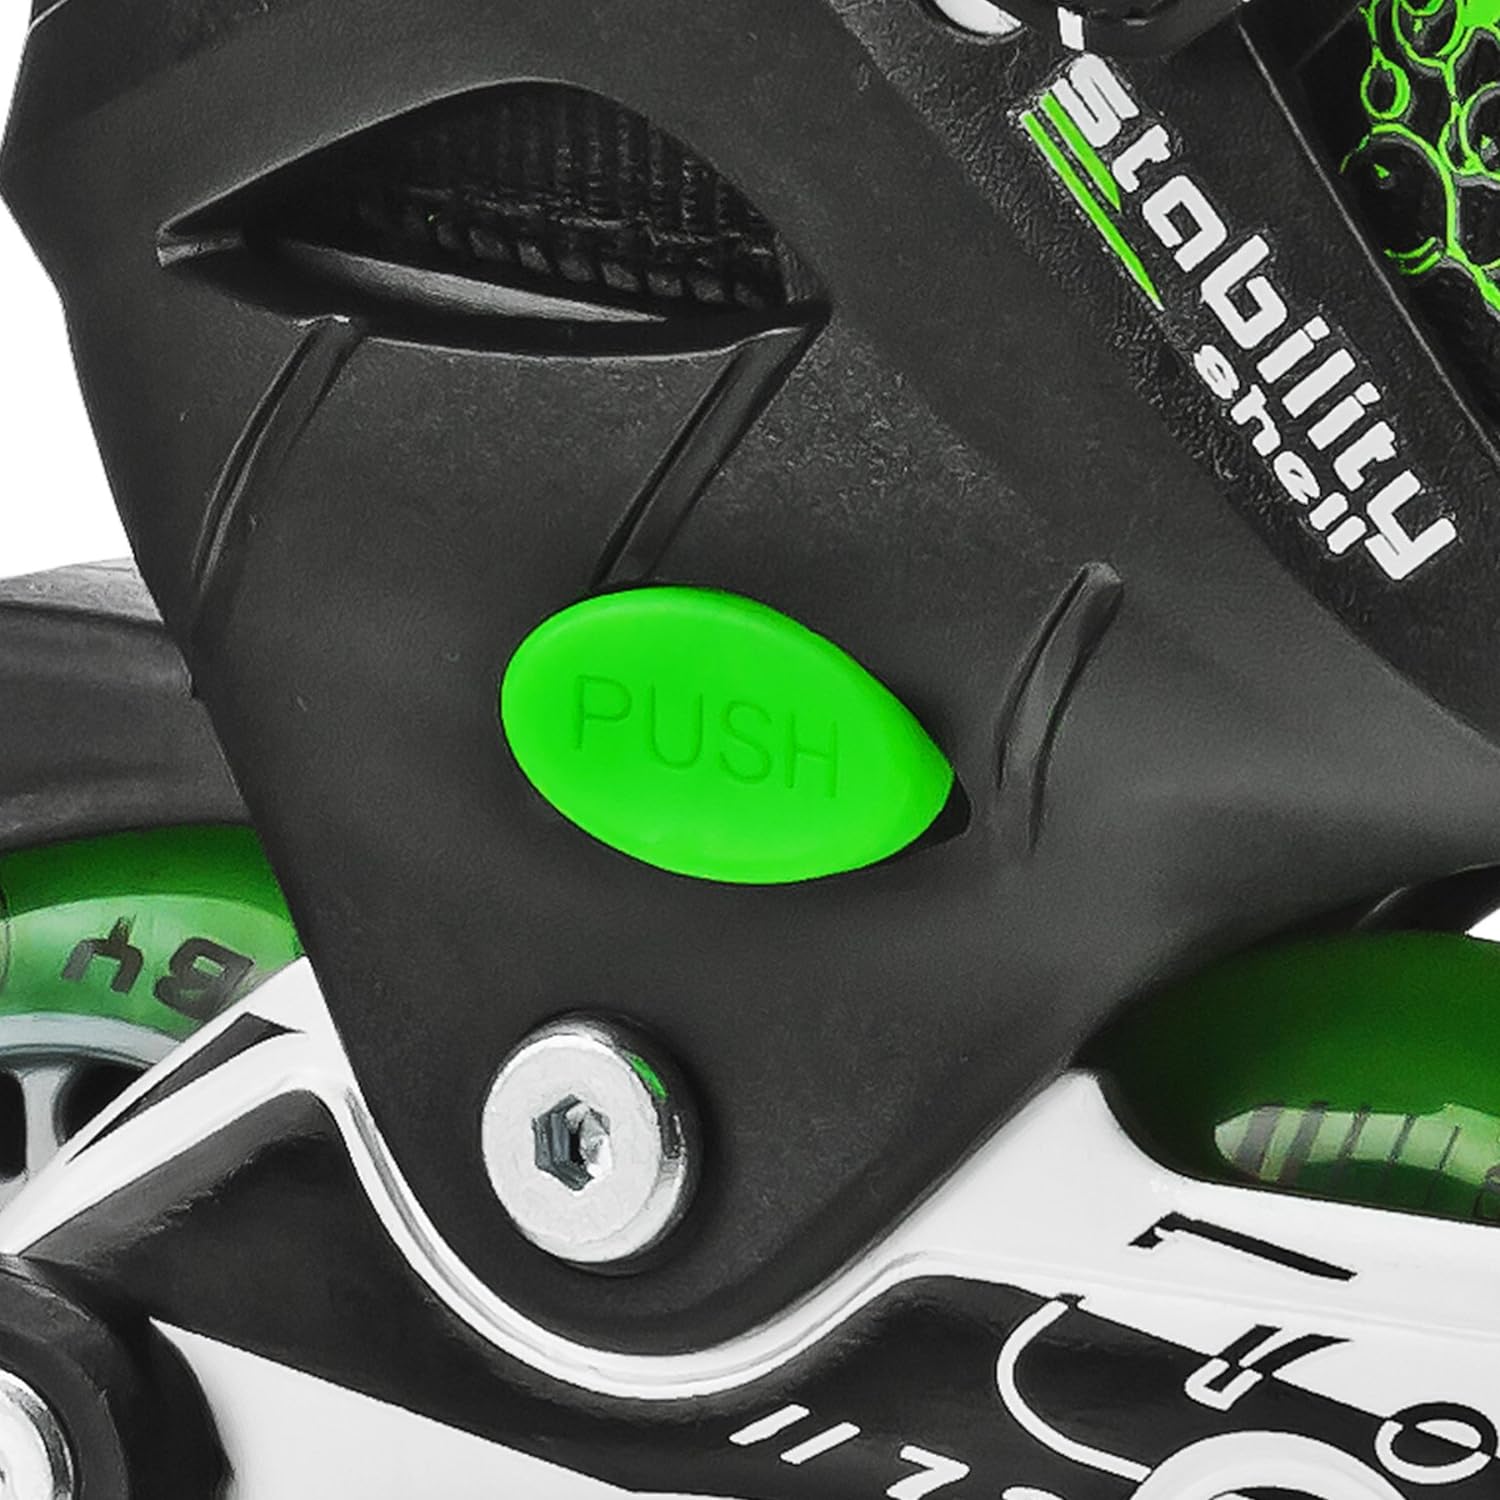 Rollerderby Inline Skate Black and Green Lower Side View